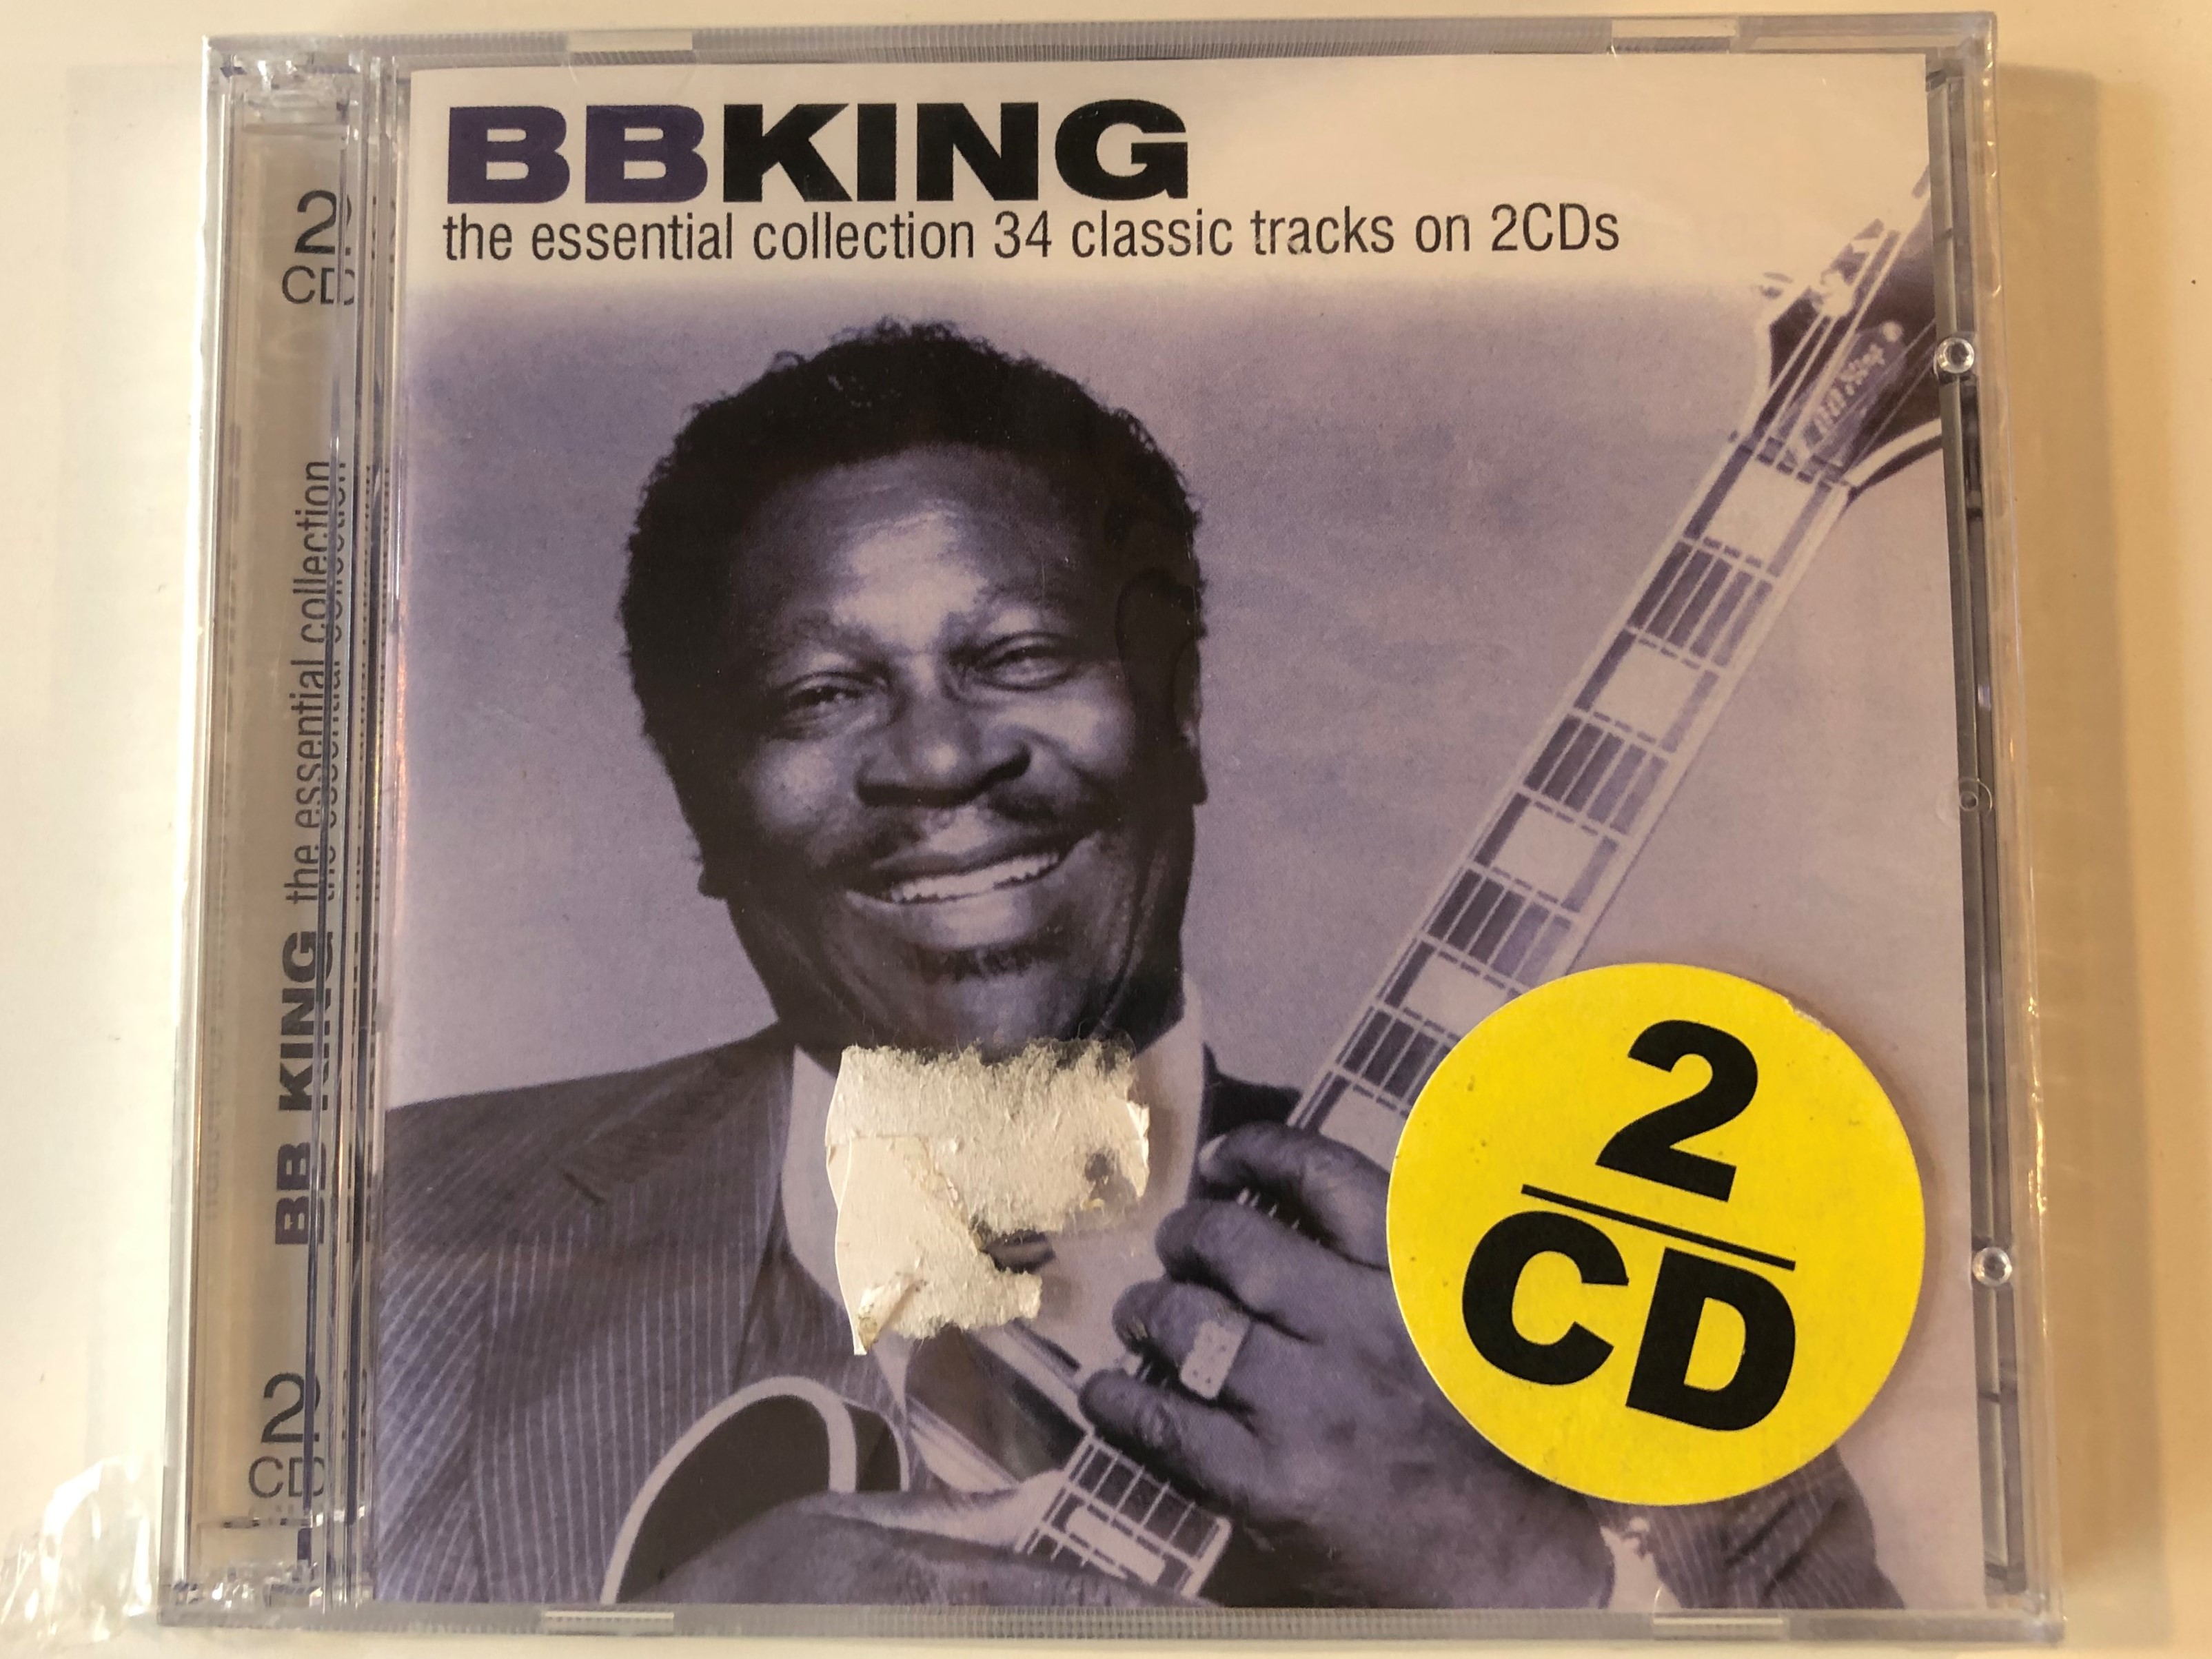 bb-king-the-essential-collection-34-classic-tracks-on-2cds-play-24-7-2x-audio-cd-2007-play-2-039-1-.jpg